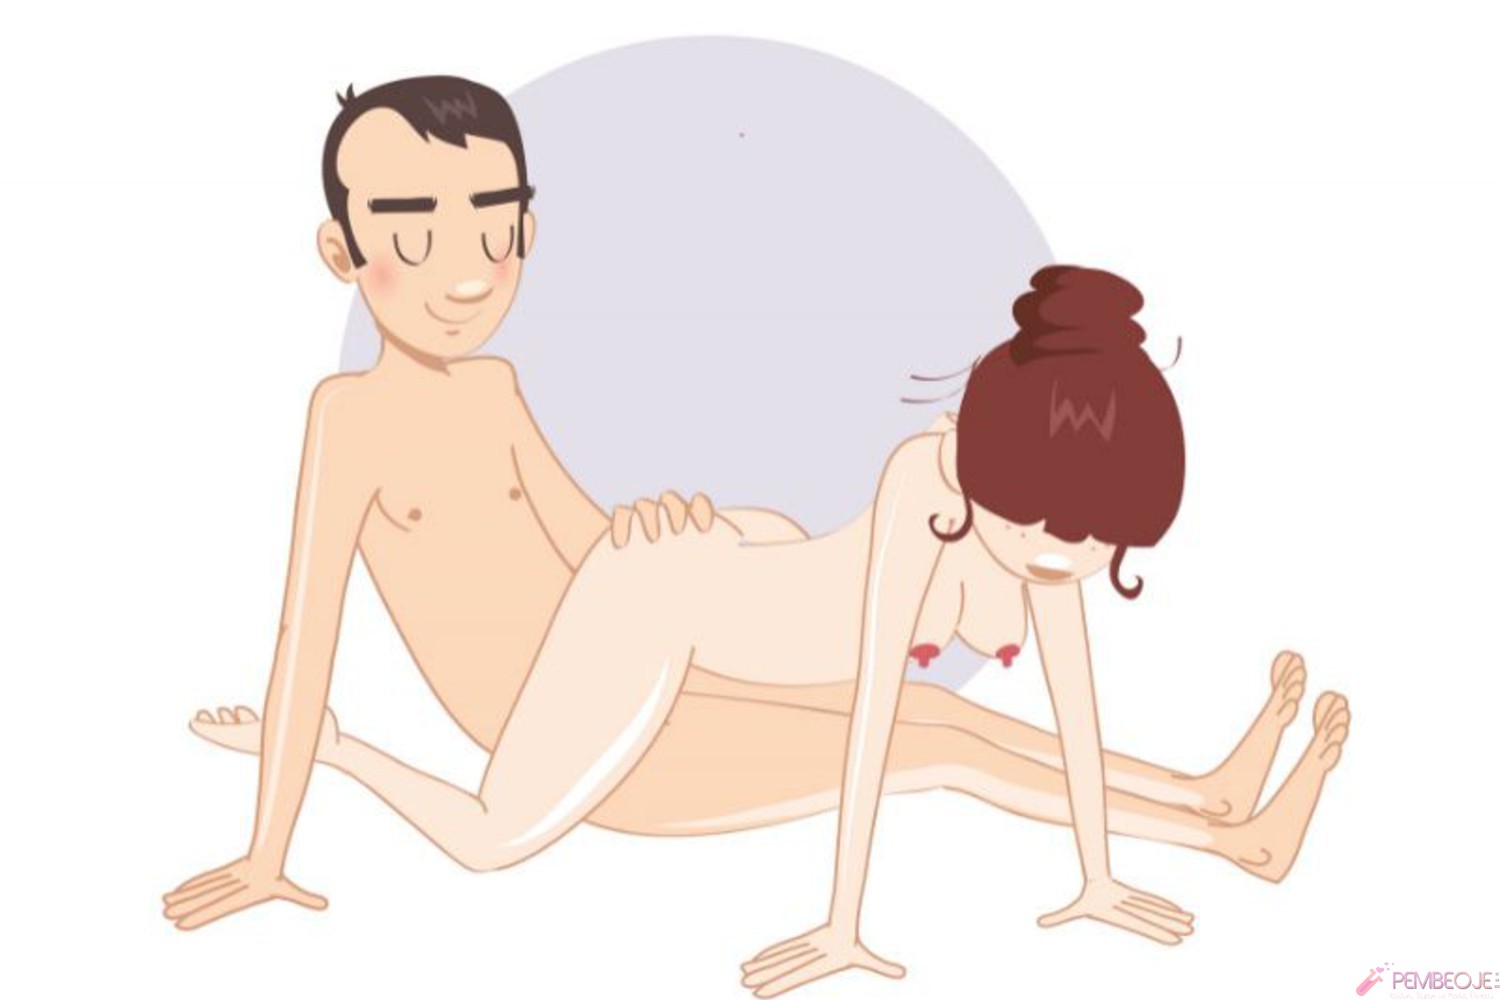 All Sex Positions Toons - Sex position free cartoon hentai galleries